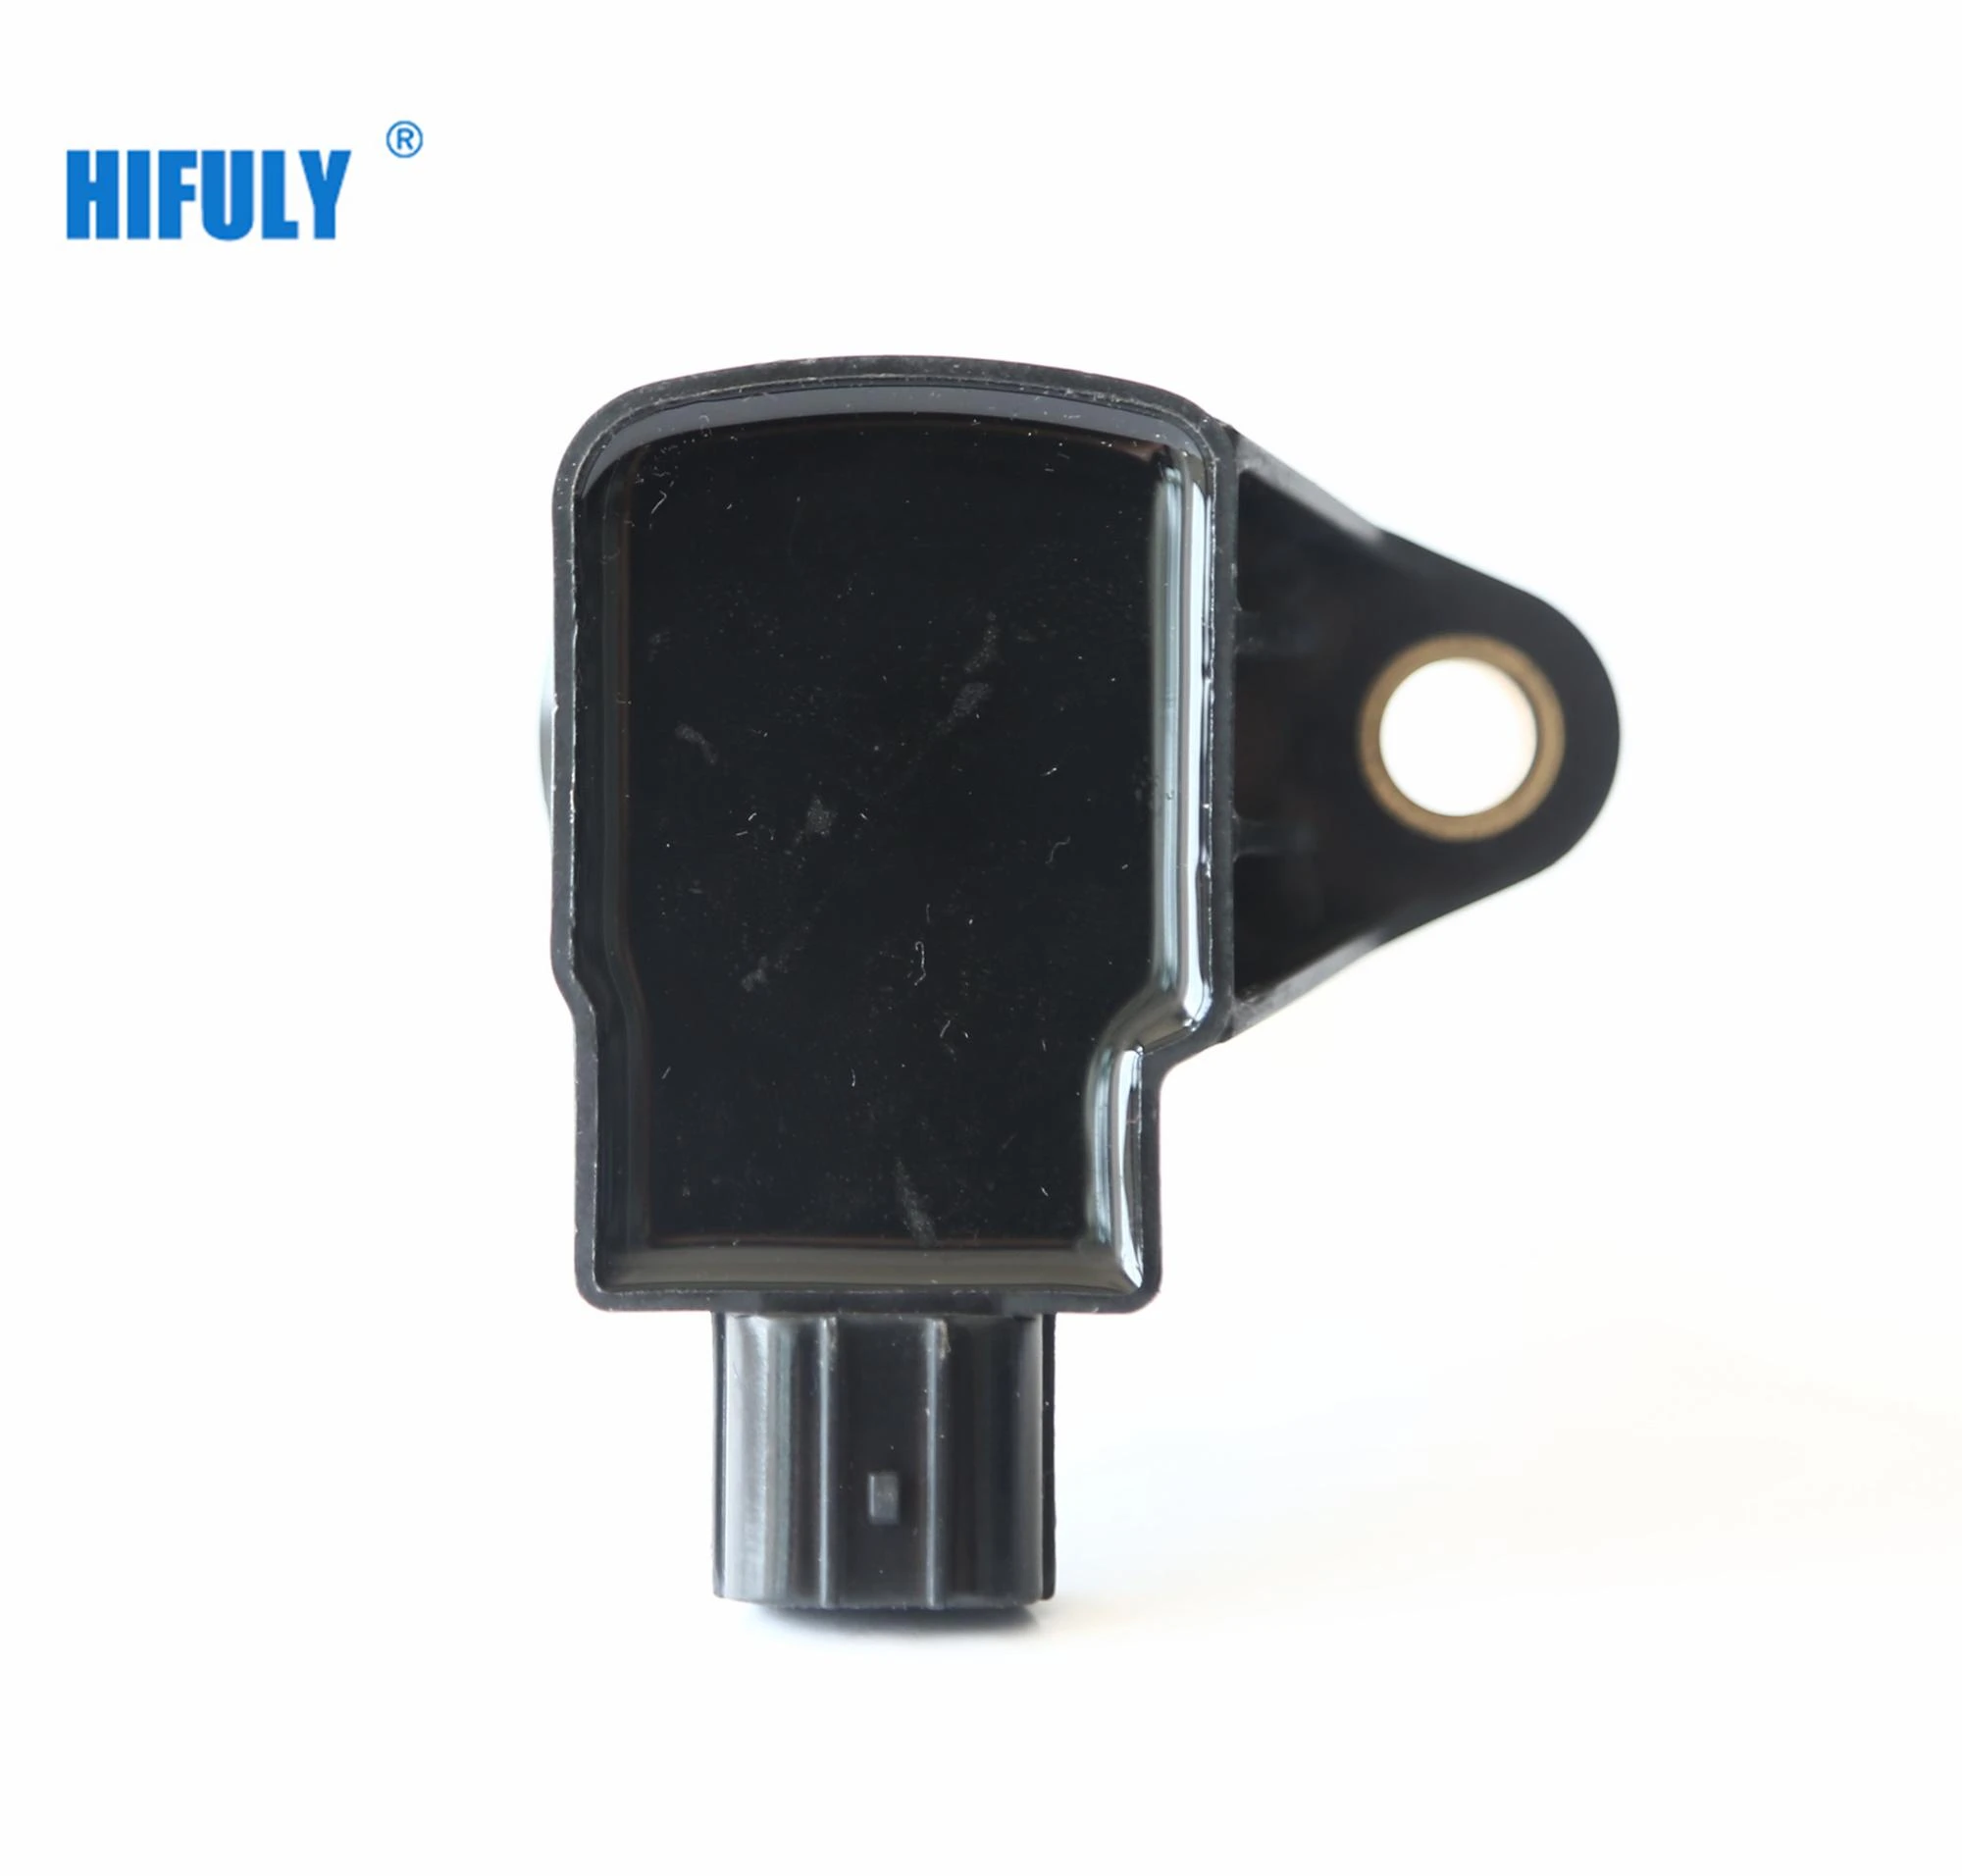 Manufacturer of 30520-PWC-003 CM11-110 ignition coil for Honda Fit 1.5L L4